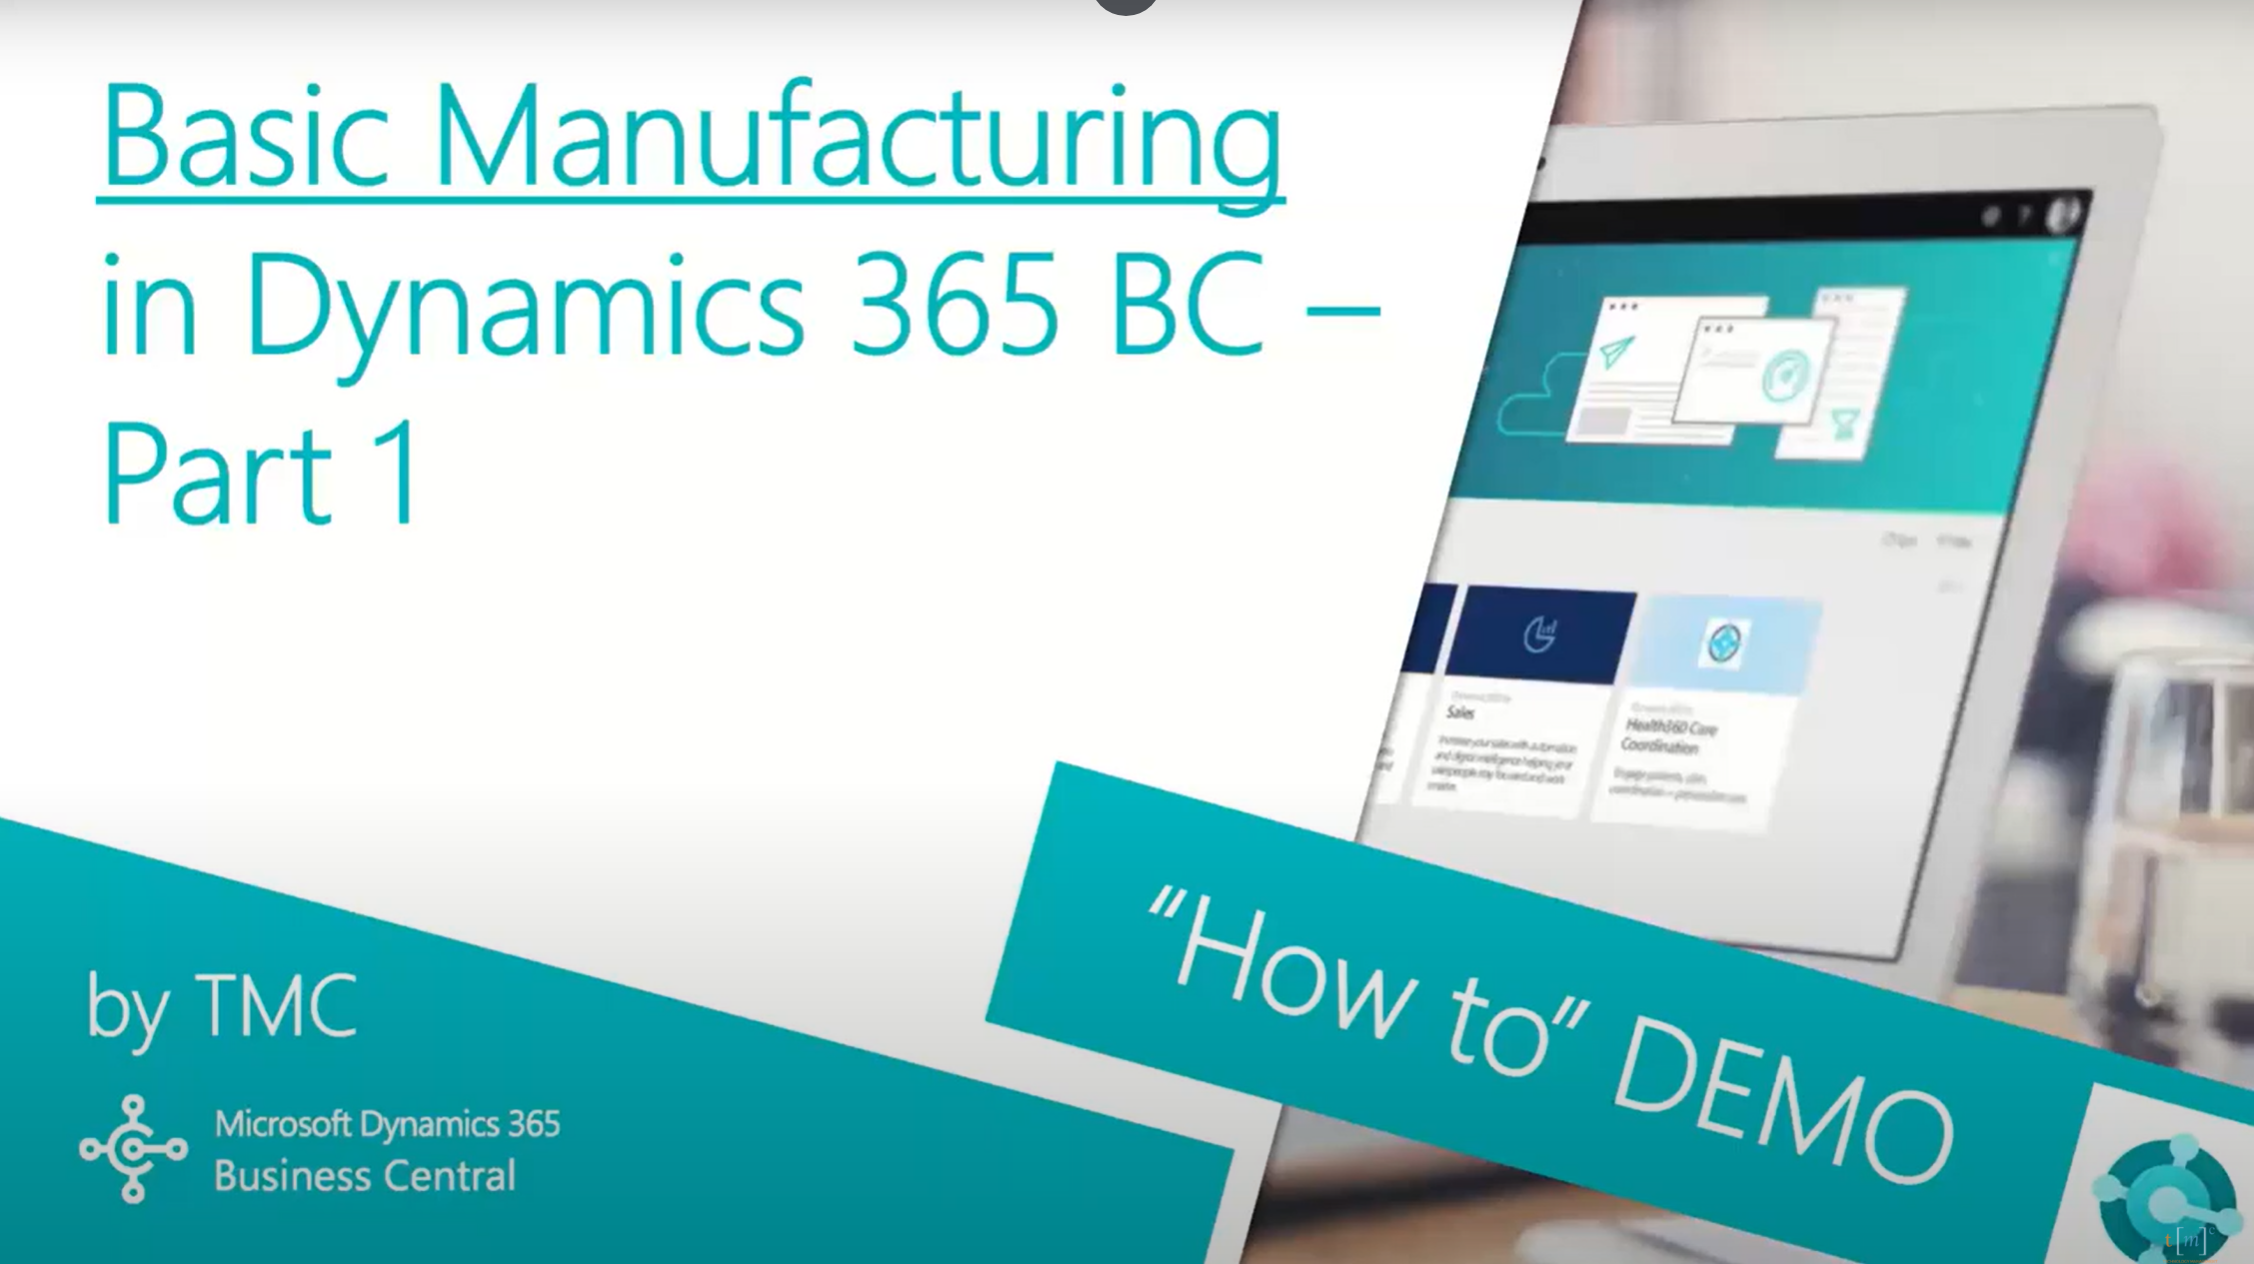 Dynamics 365 Business Central - Basic Manufacturing